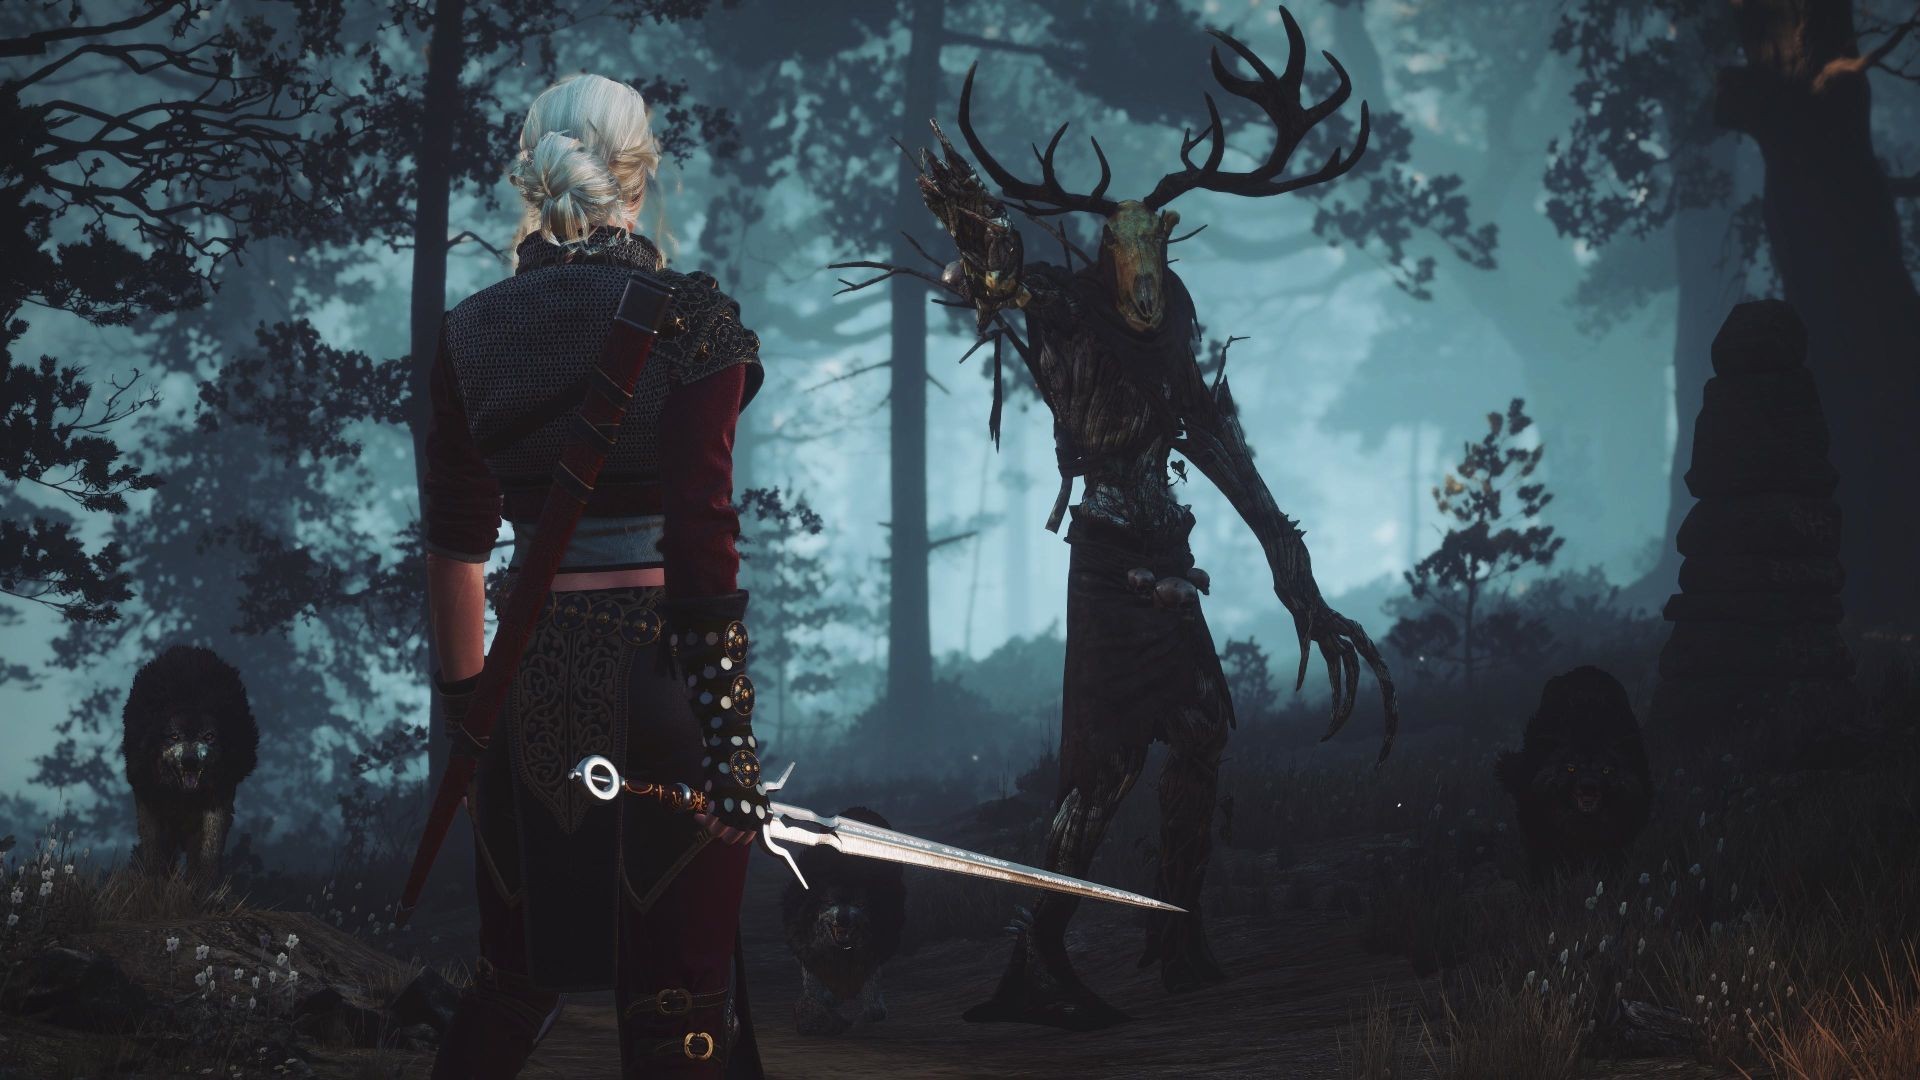 Wallpapers The Witcher Wild Hunt with high-resolution 1920x1080 pixel. You can use this poster wallpaper for your Desktop Computers, Mac Screensavers, Windows Backgrounds, iPhone Wallpapers, Tablet or Android Lock screen and another Mobile device